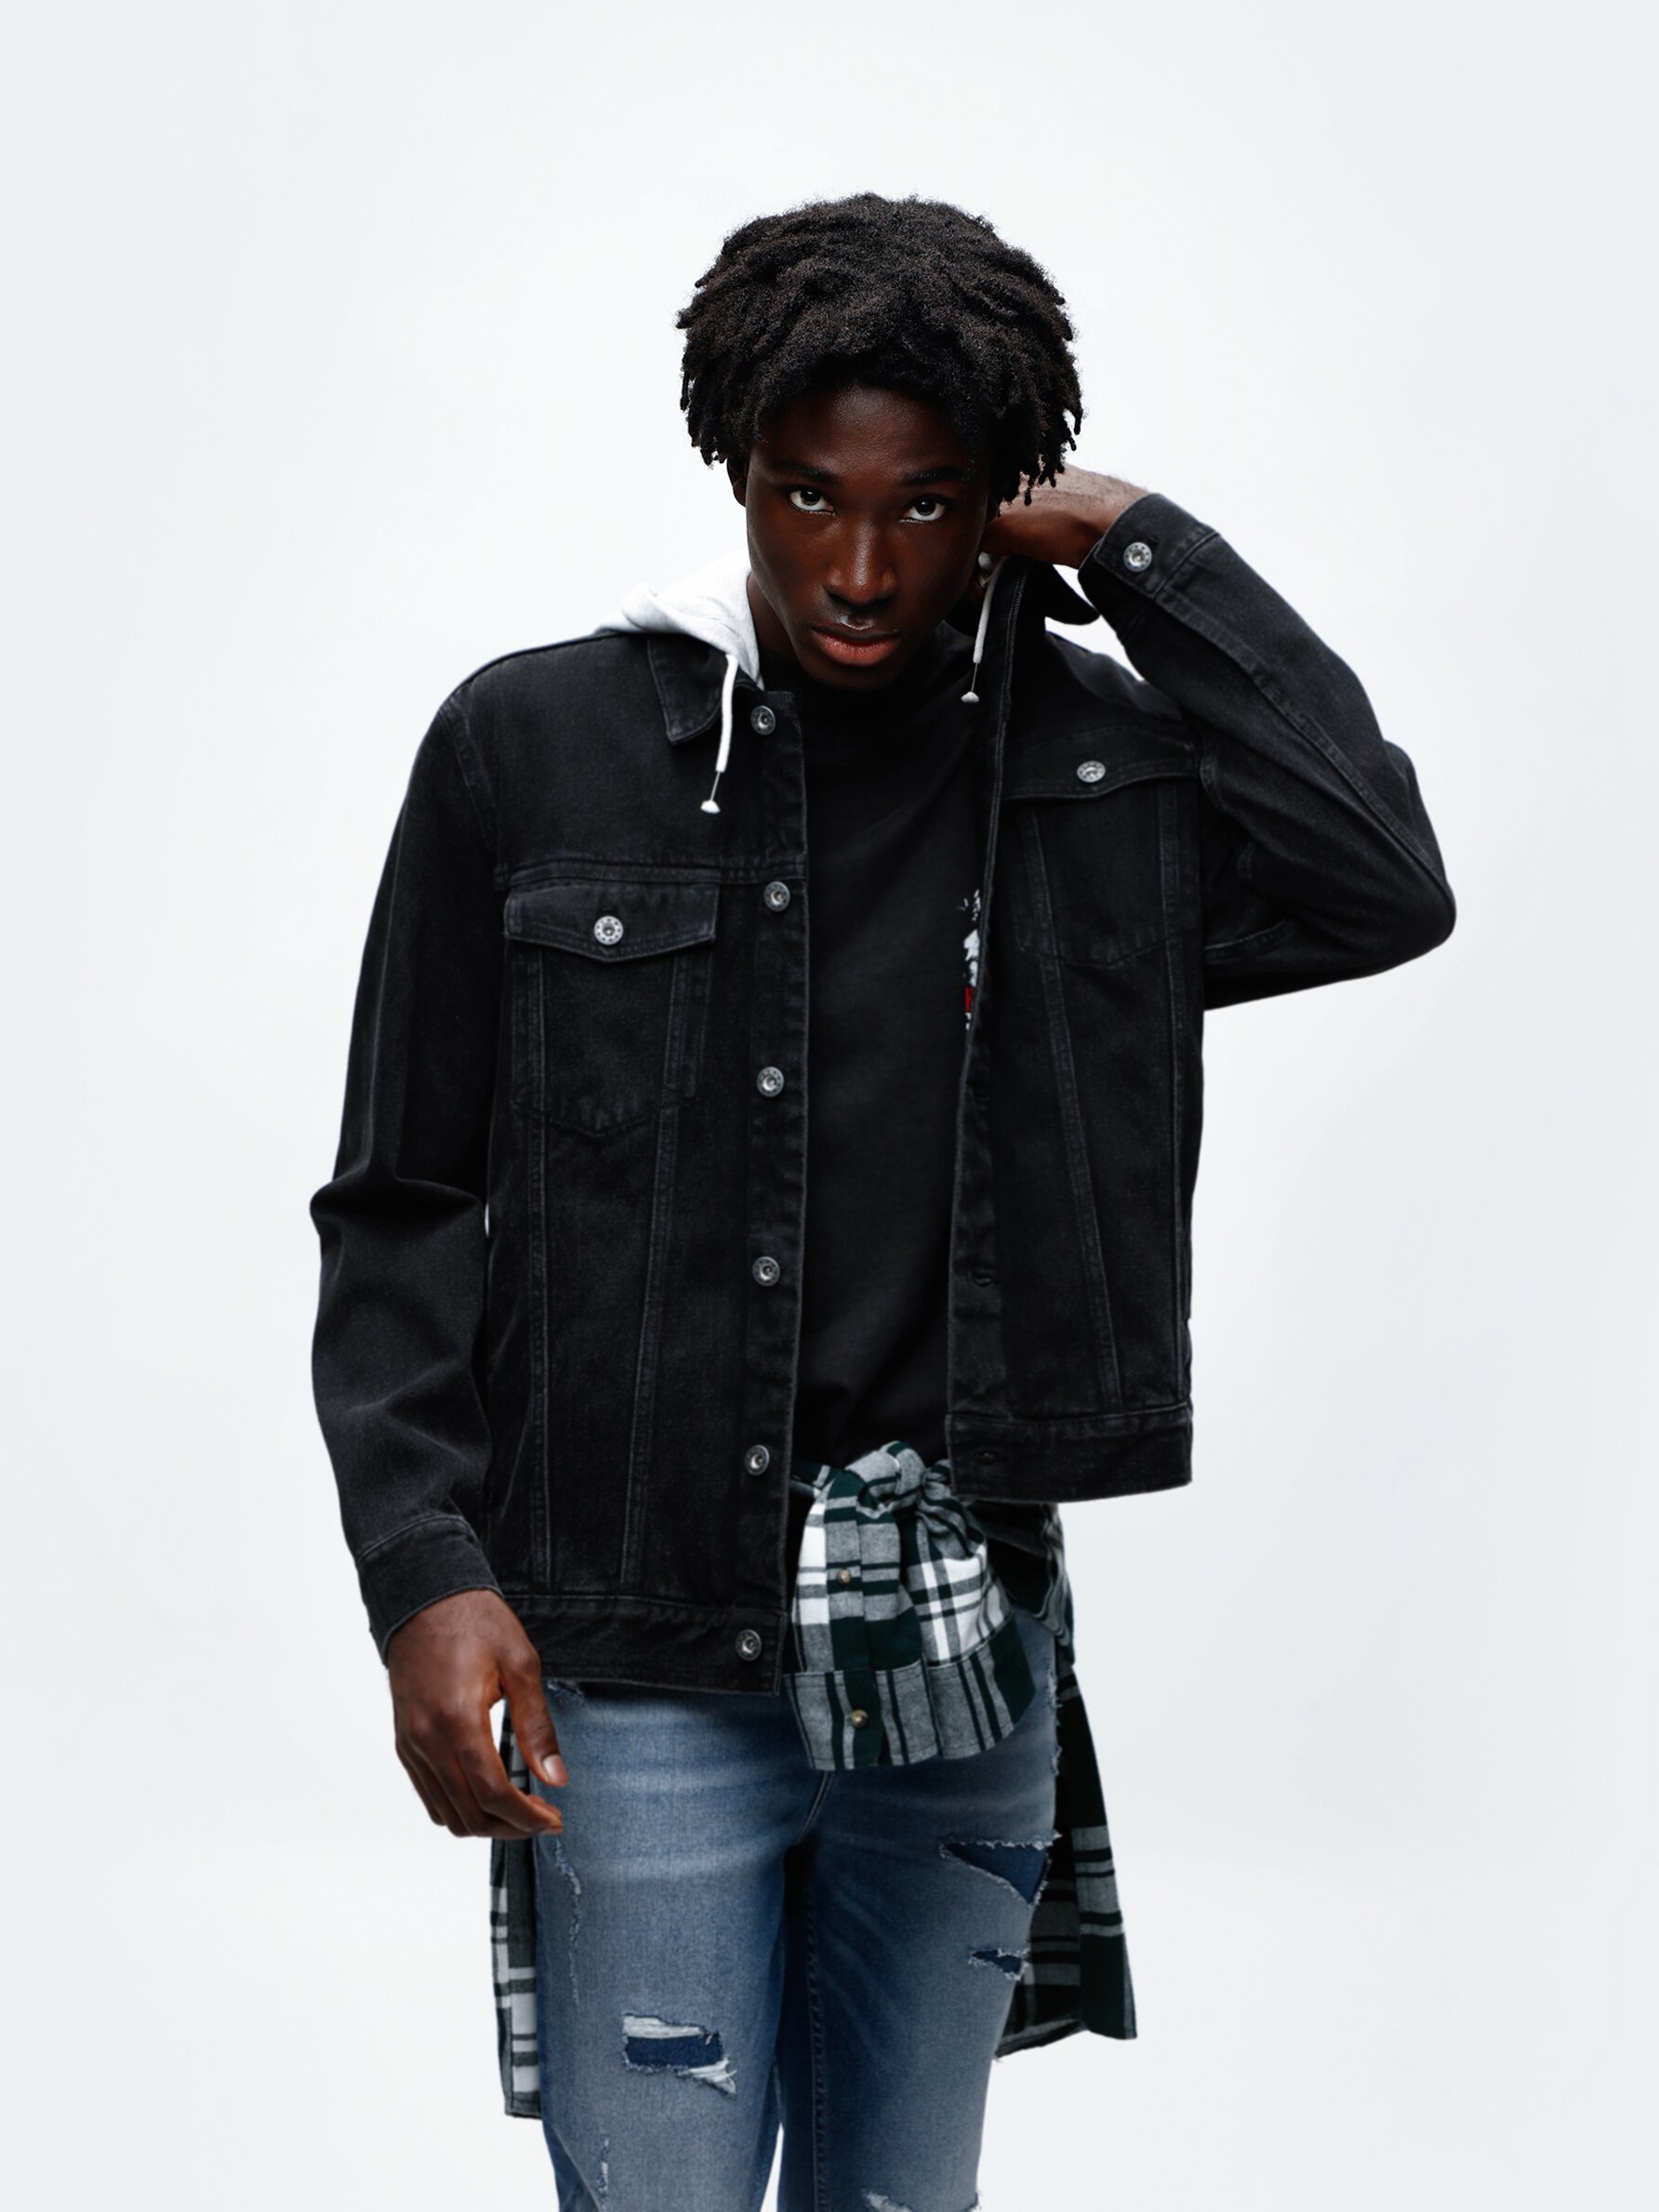 Hi Street Designer Ripped Markham Denim Jackets With Distressed Denim And  Holes Streetwear Trucker Outerwear Tops From Just4urwear, $51.16 |  DHgate.Com